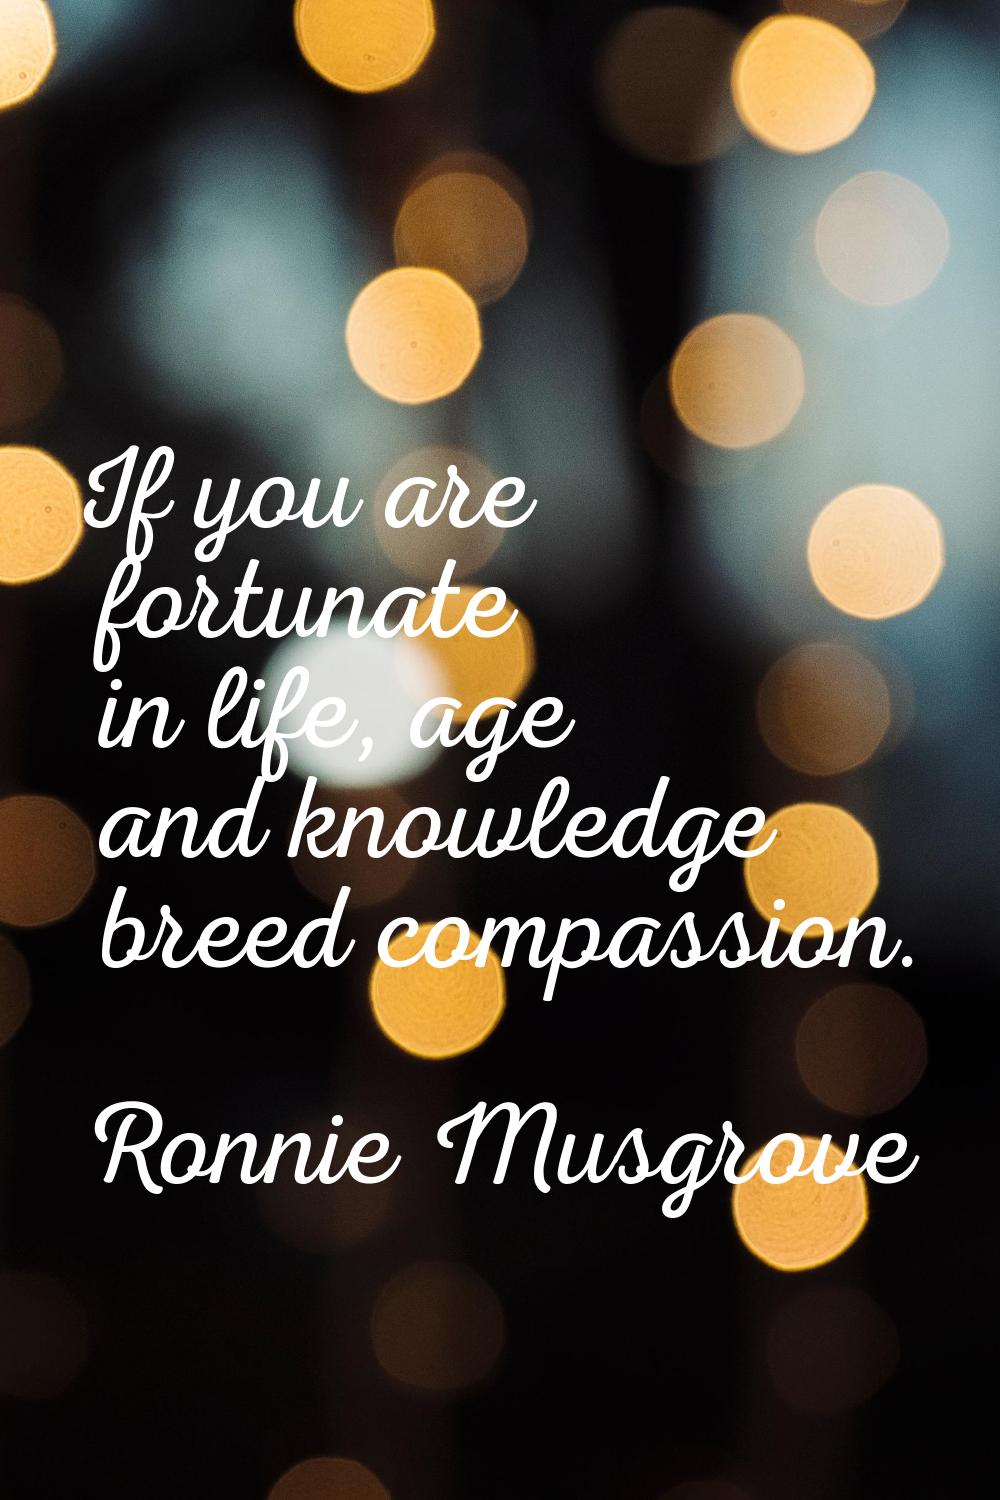 If you are fortunate in life, age and knowledge breed compassion.